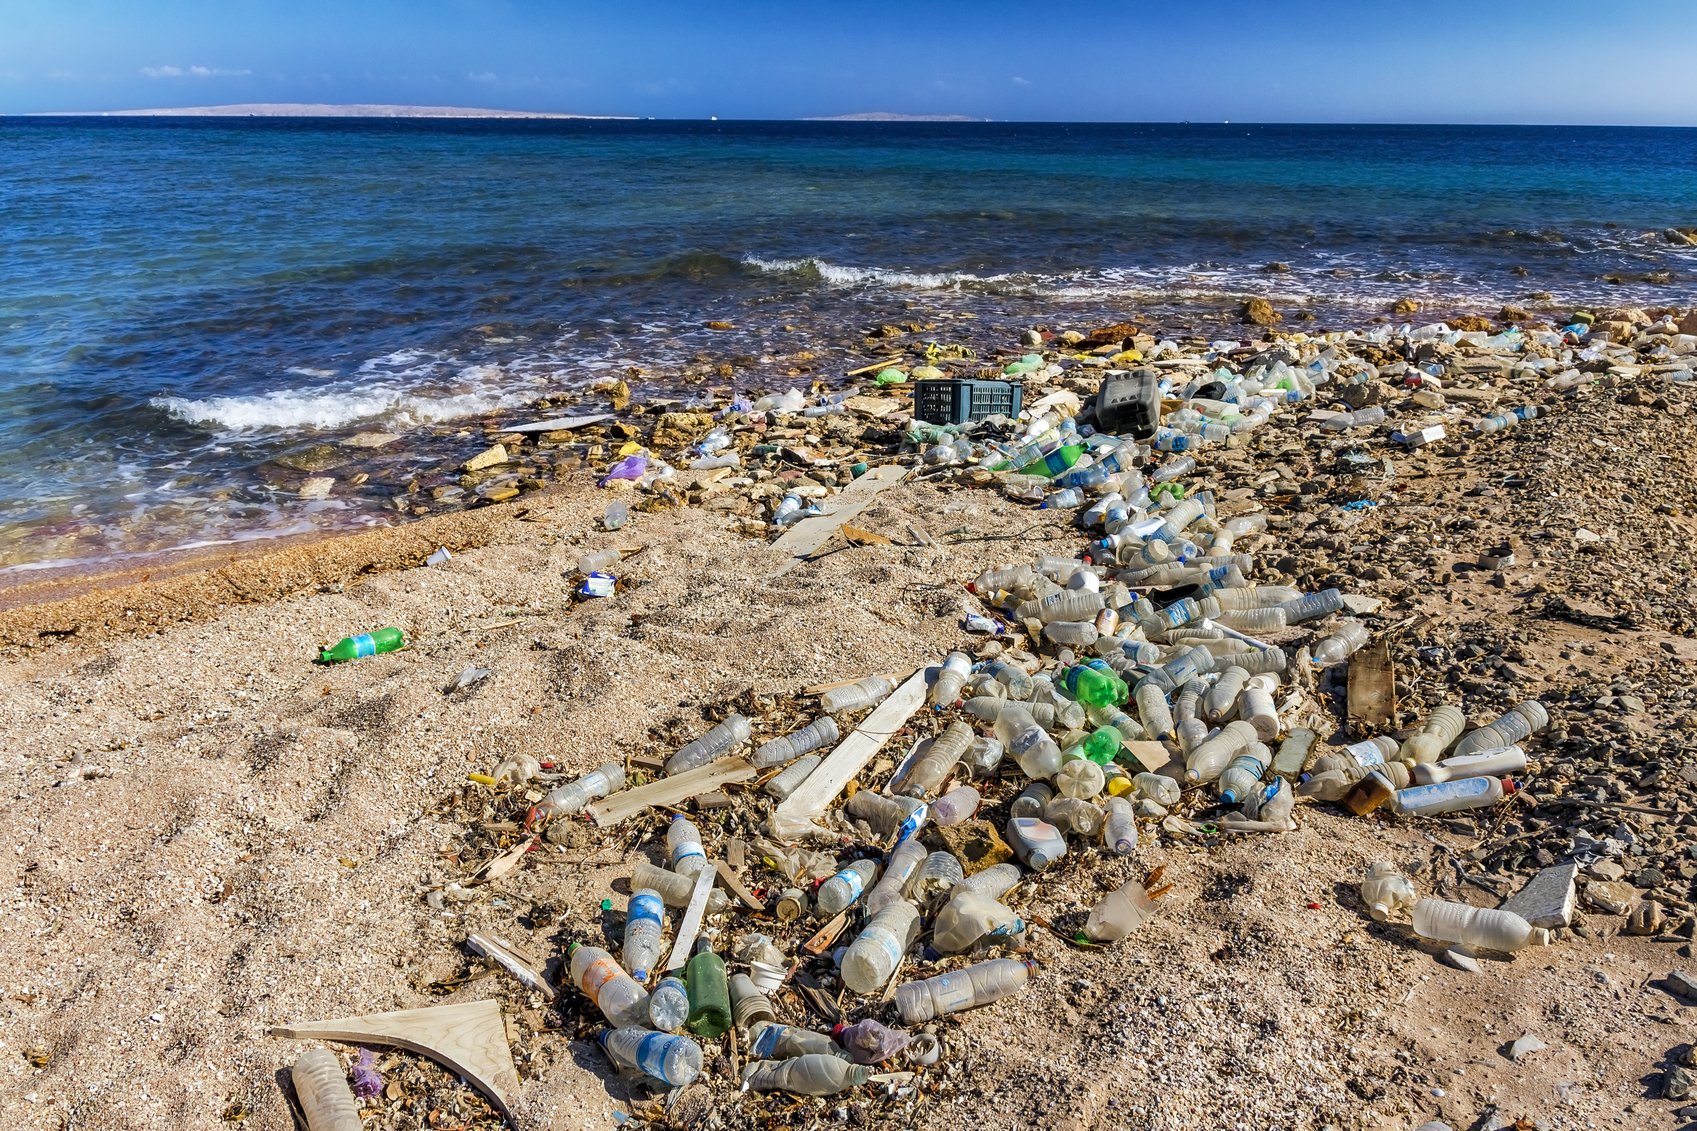 Garbage in the Beach and beautiful seascape in background, Egypt, Red Sea